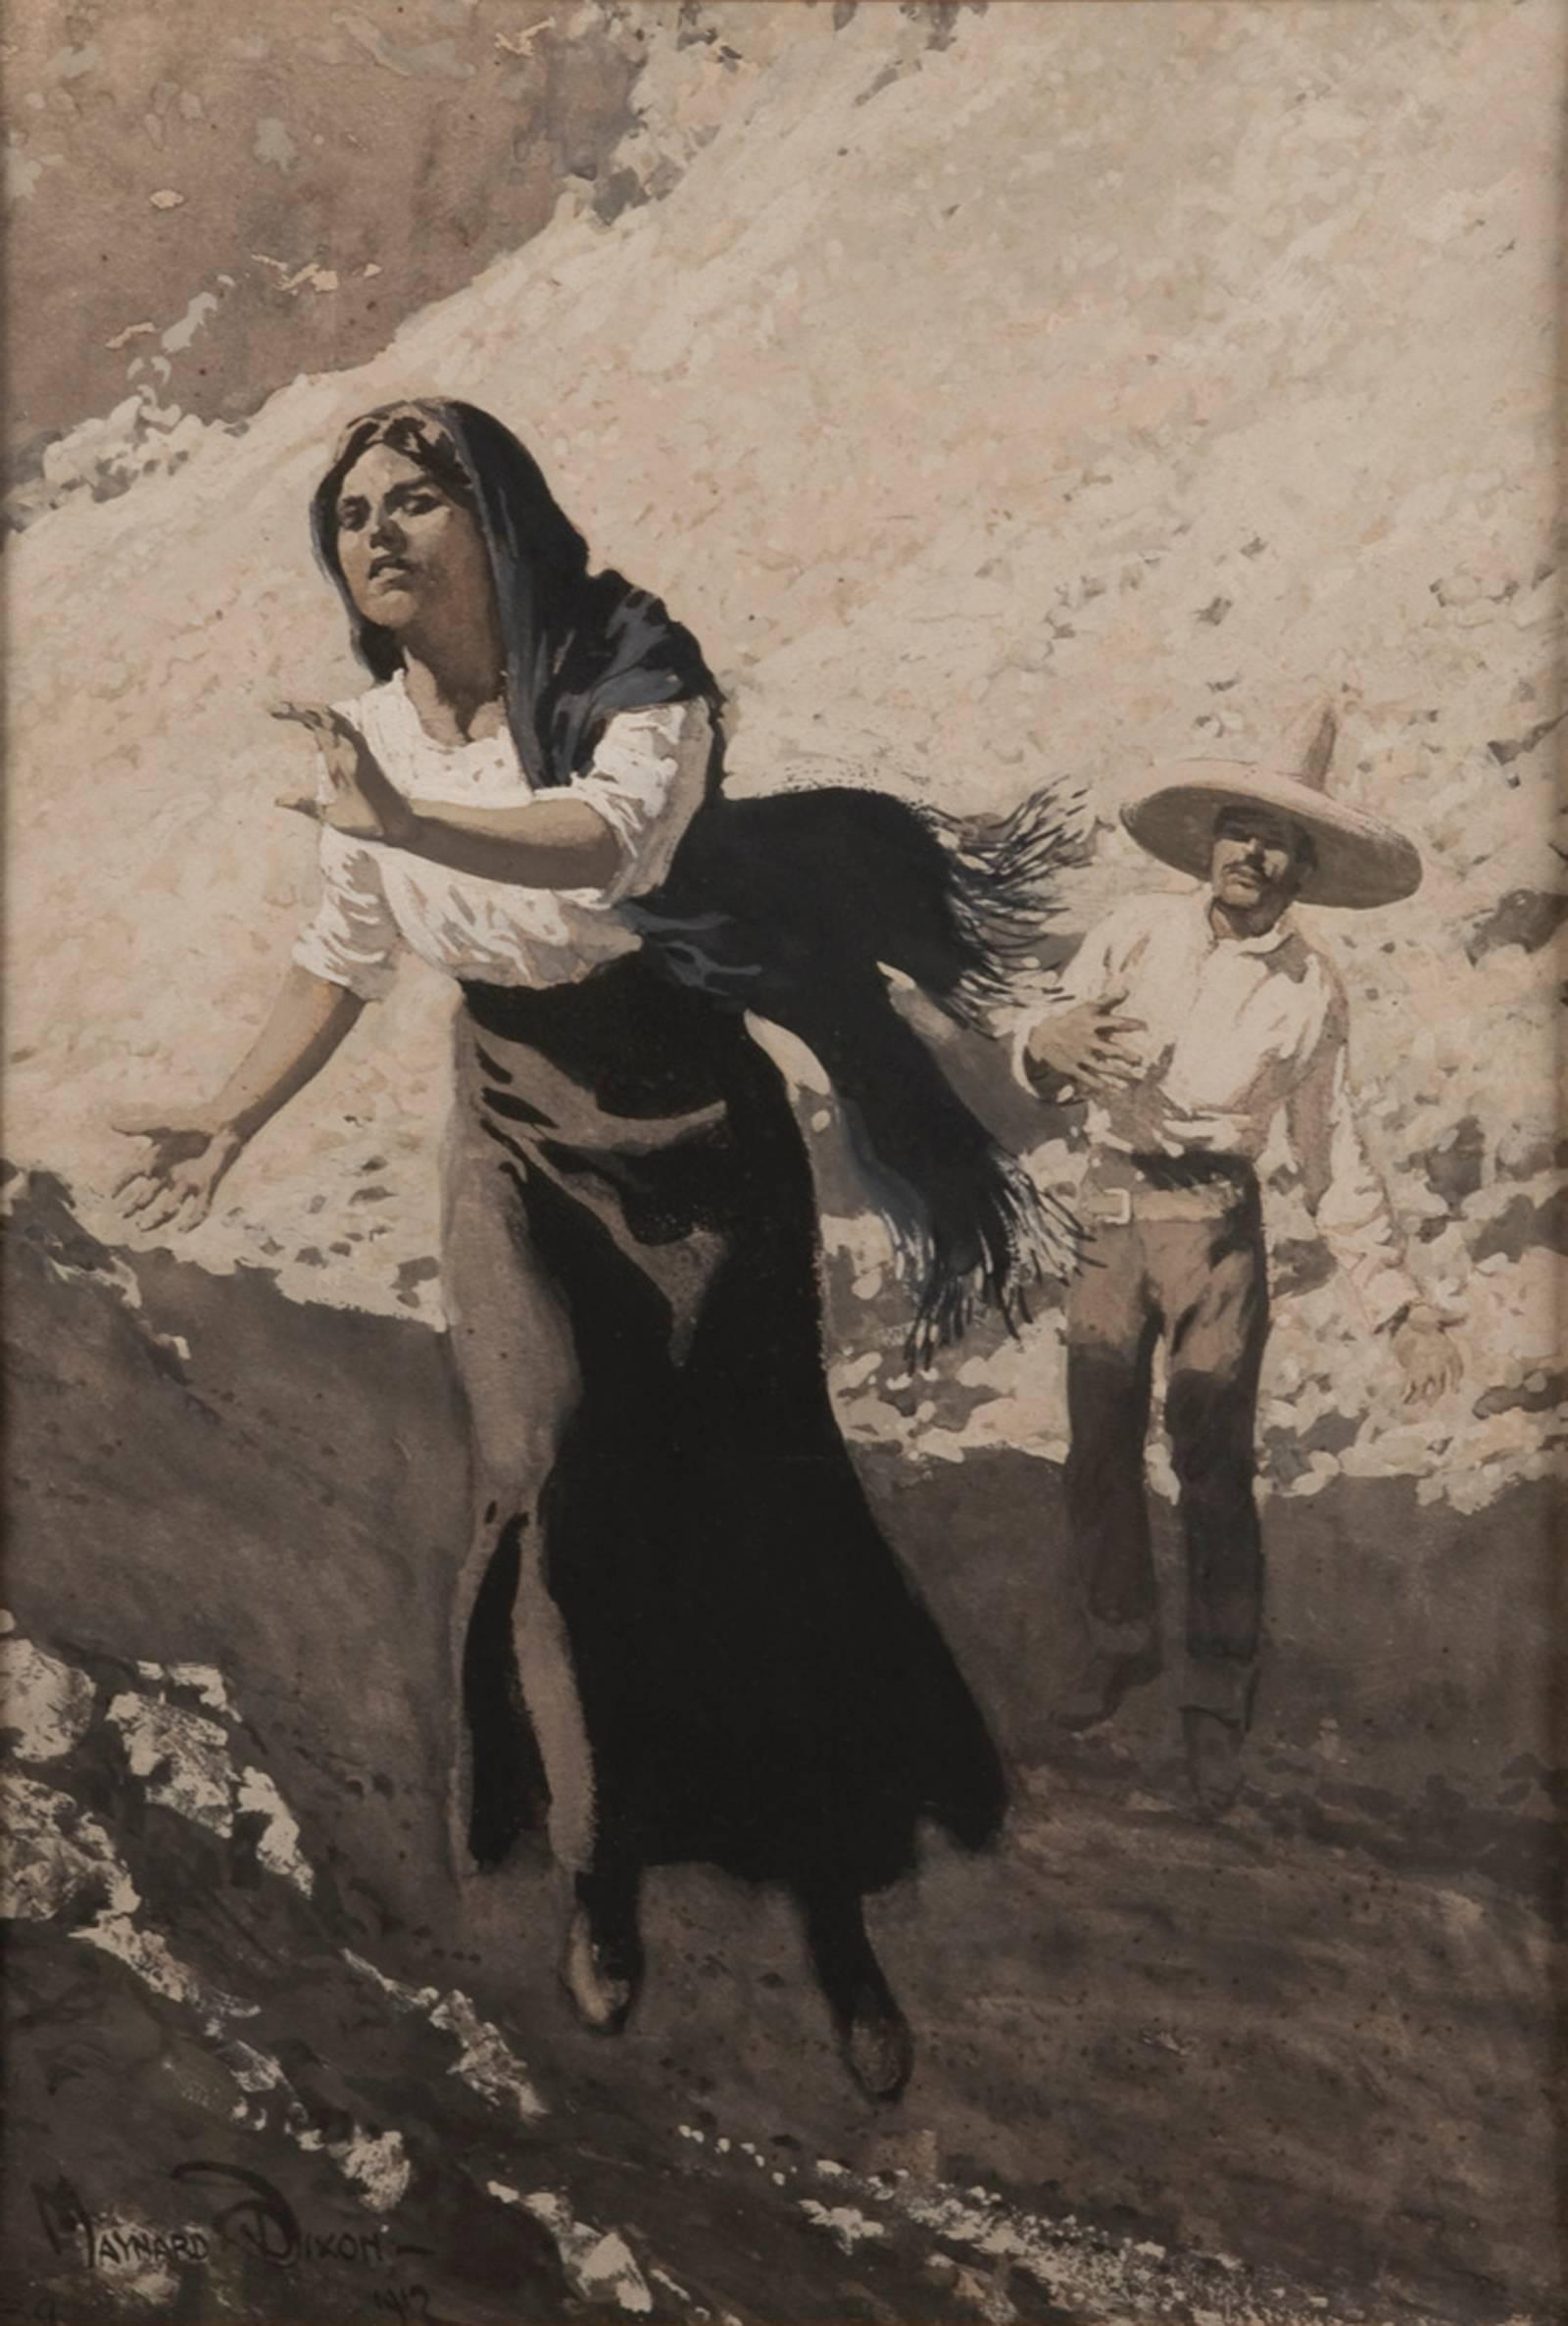 Captured in mid-stride with her dark shawl blowing behind her, a seemingly distressed woman runs toward the foreground of the composition, away from an exasperated man in the background. The dark attire and left lean of the female figure, in